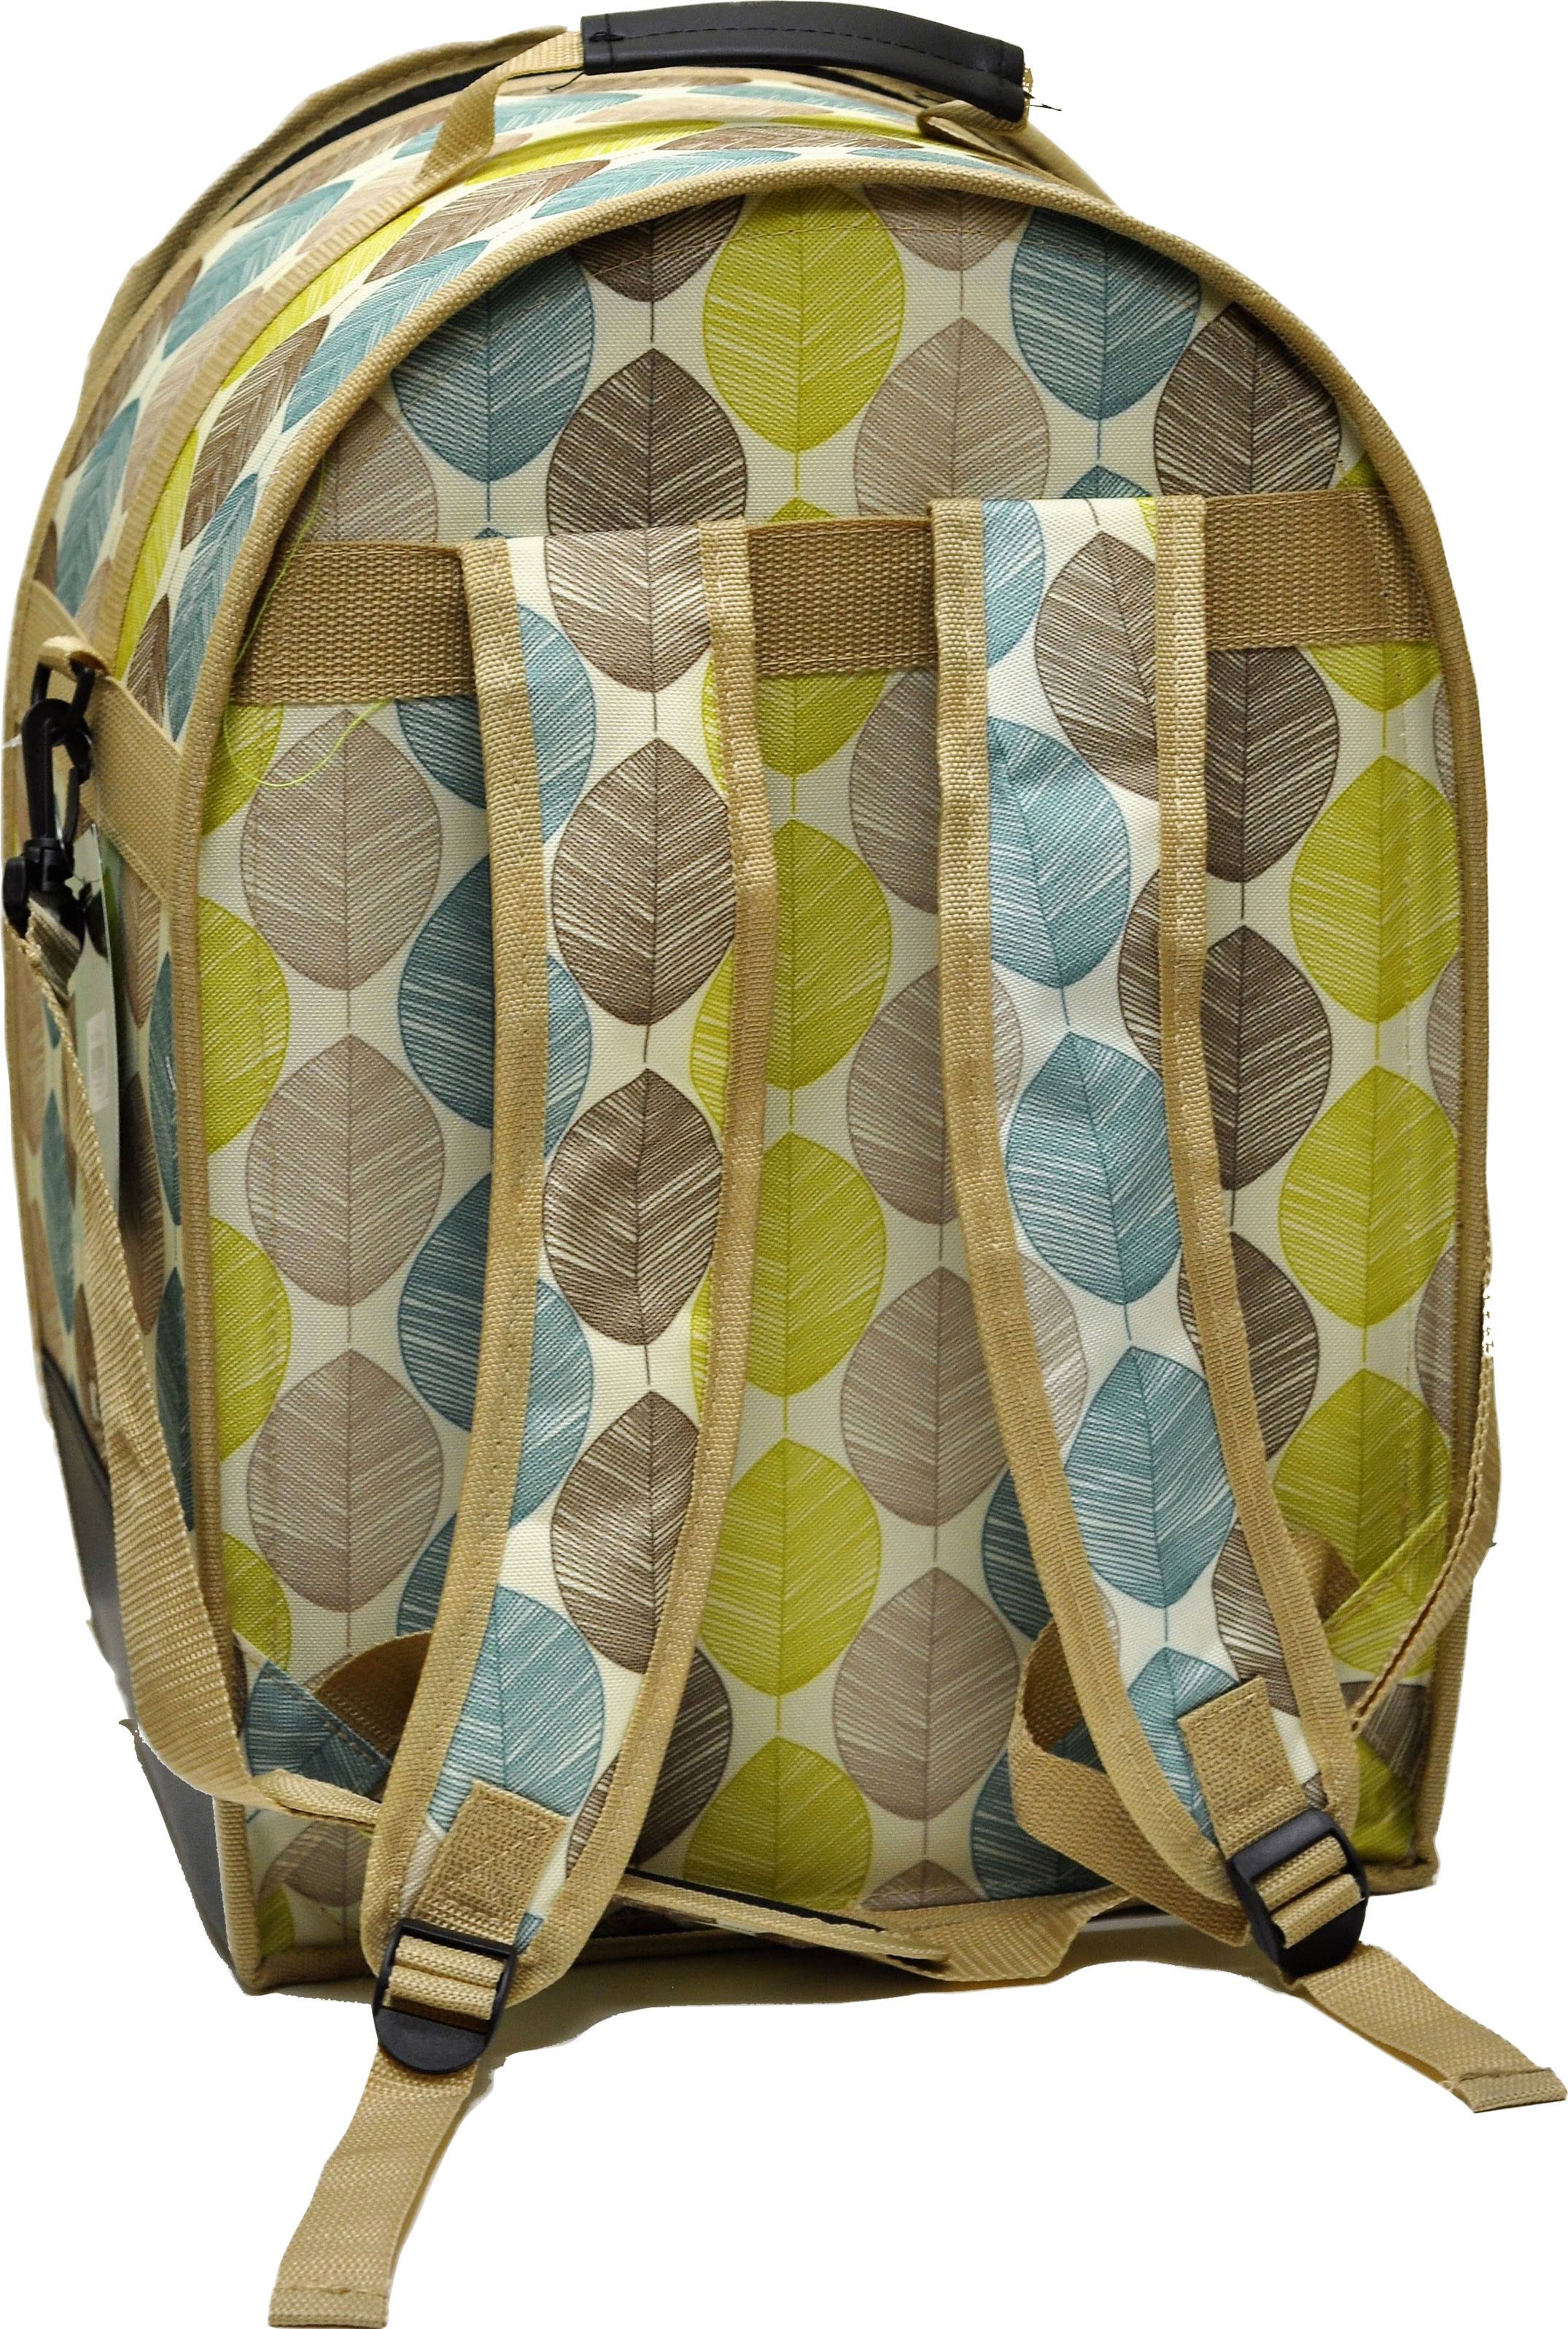 A&E Cage Happy Beaks Backpack Soft Sided Travel Carrier Small Tan